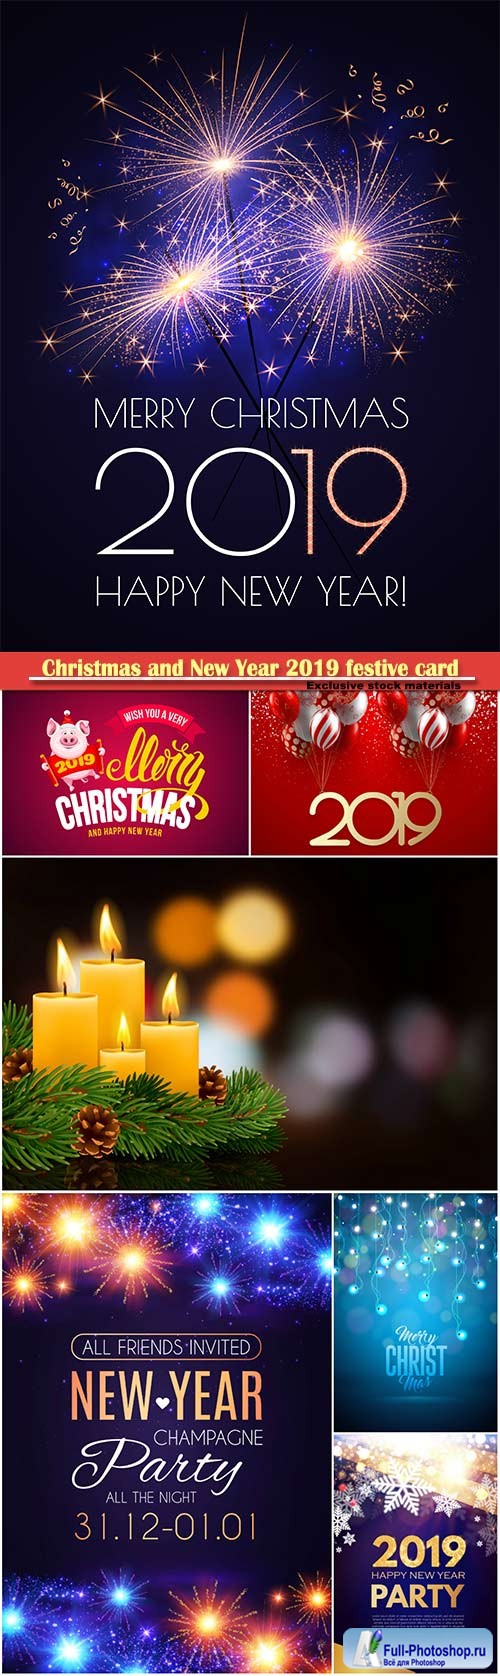 Christmas and New Year 2019 festive card